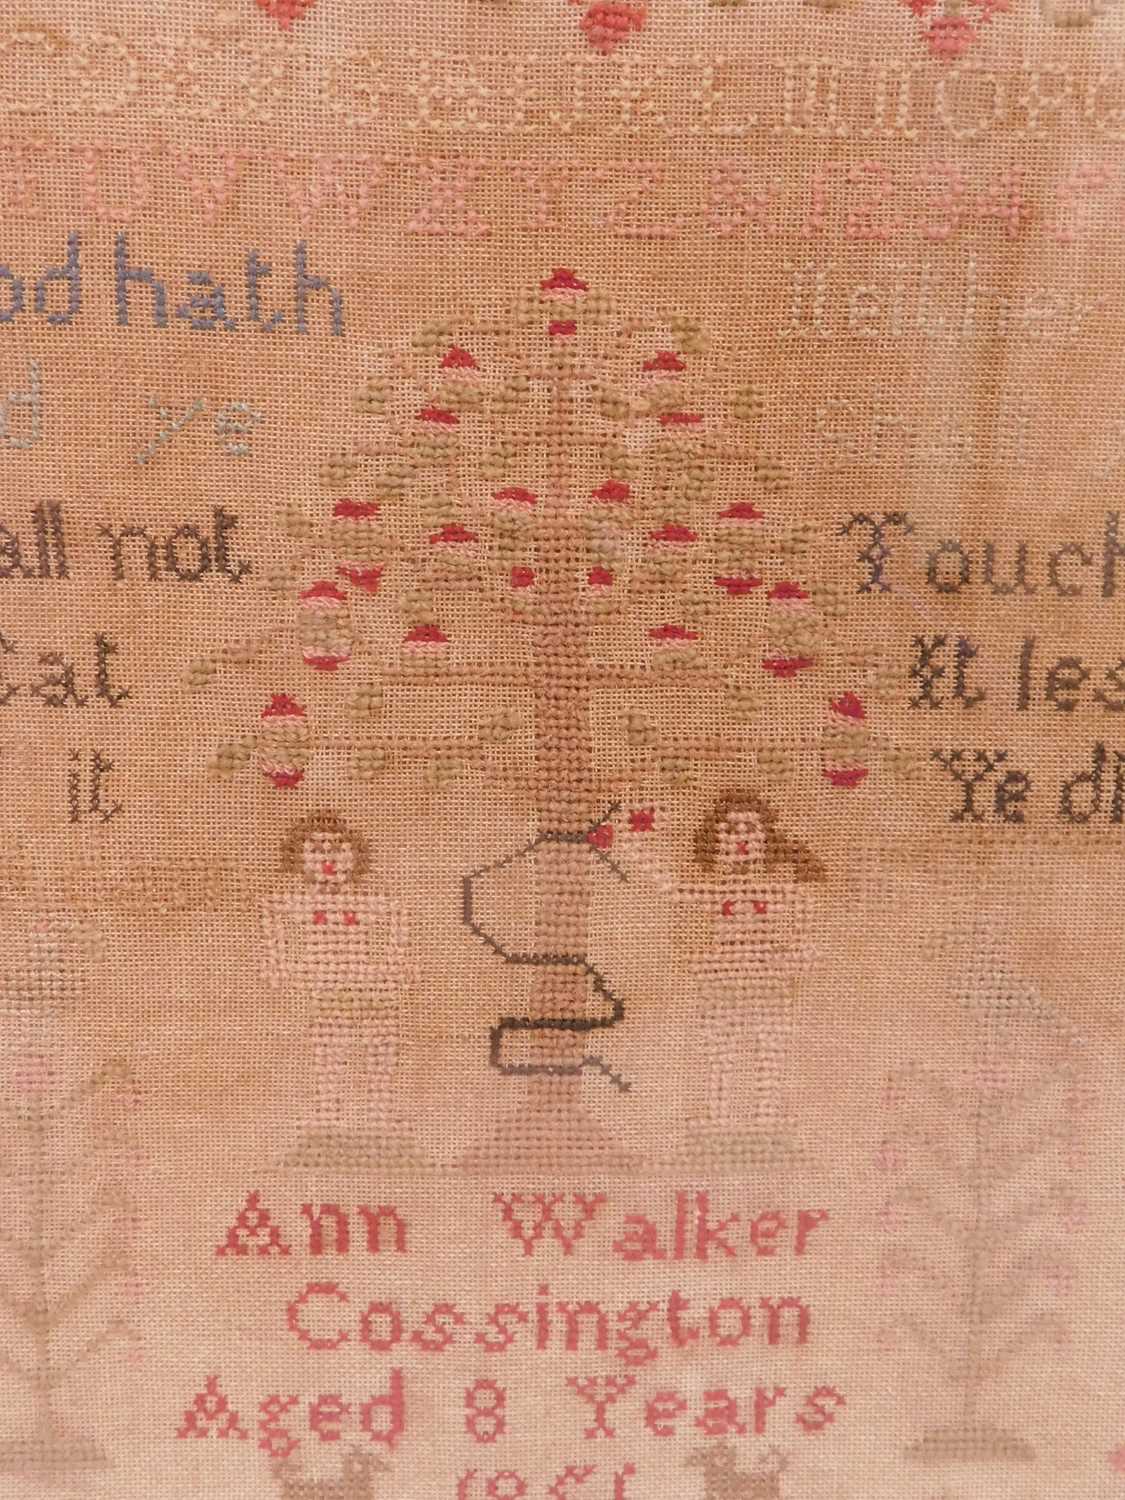 A mid 19th Century needlework sampler with alpha numeric stitching, religious text and Adam & Eve in - Image 2 of 3